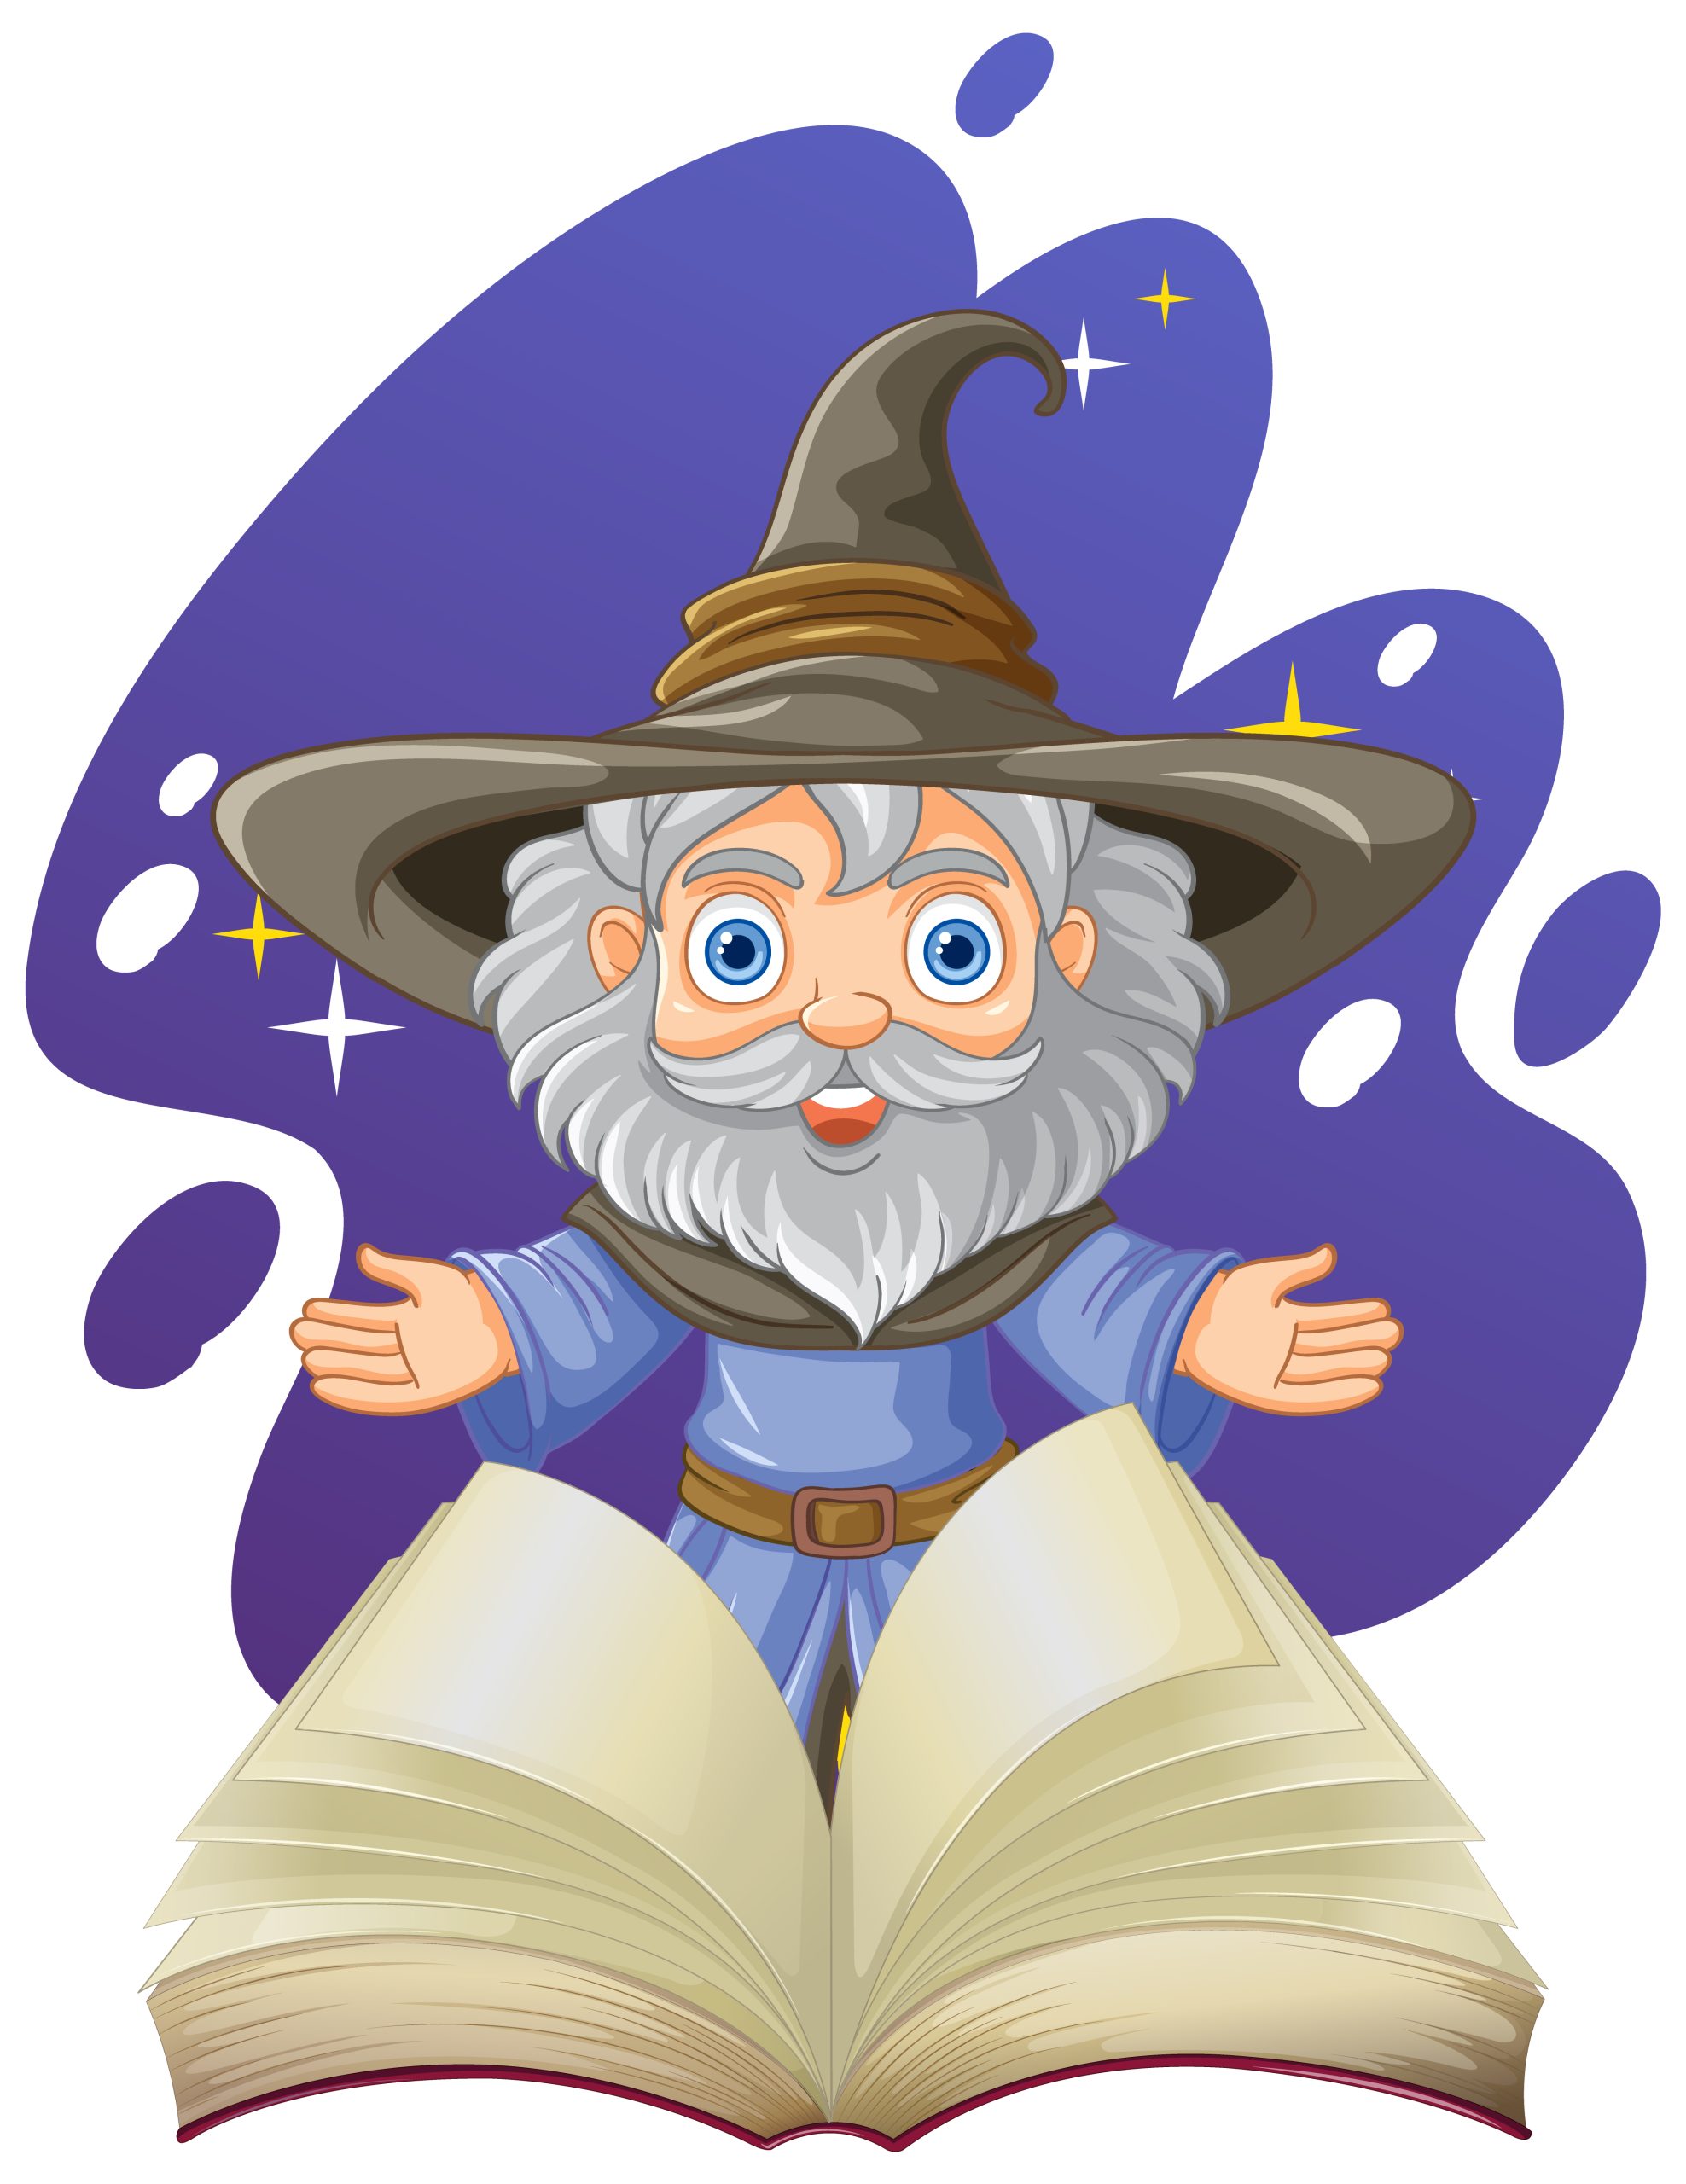 Wizard reading from a book to create seo sorcery